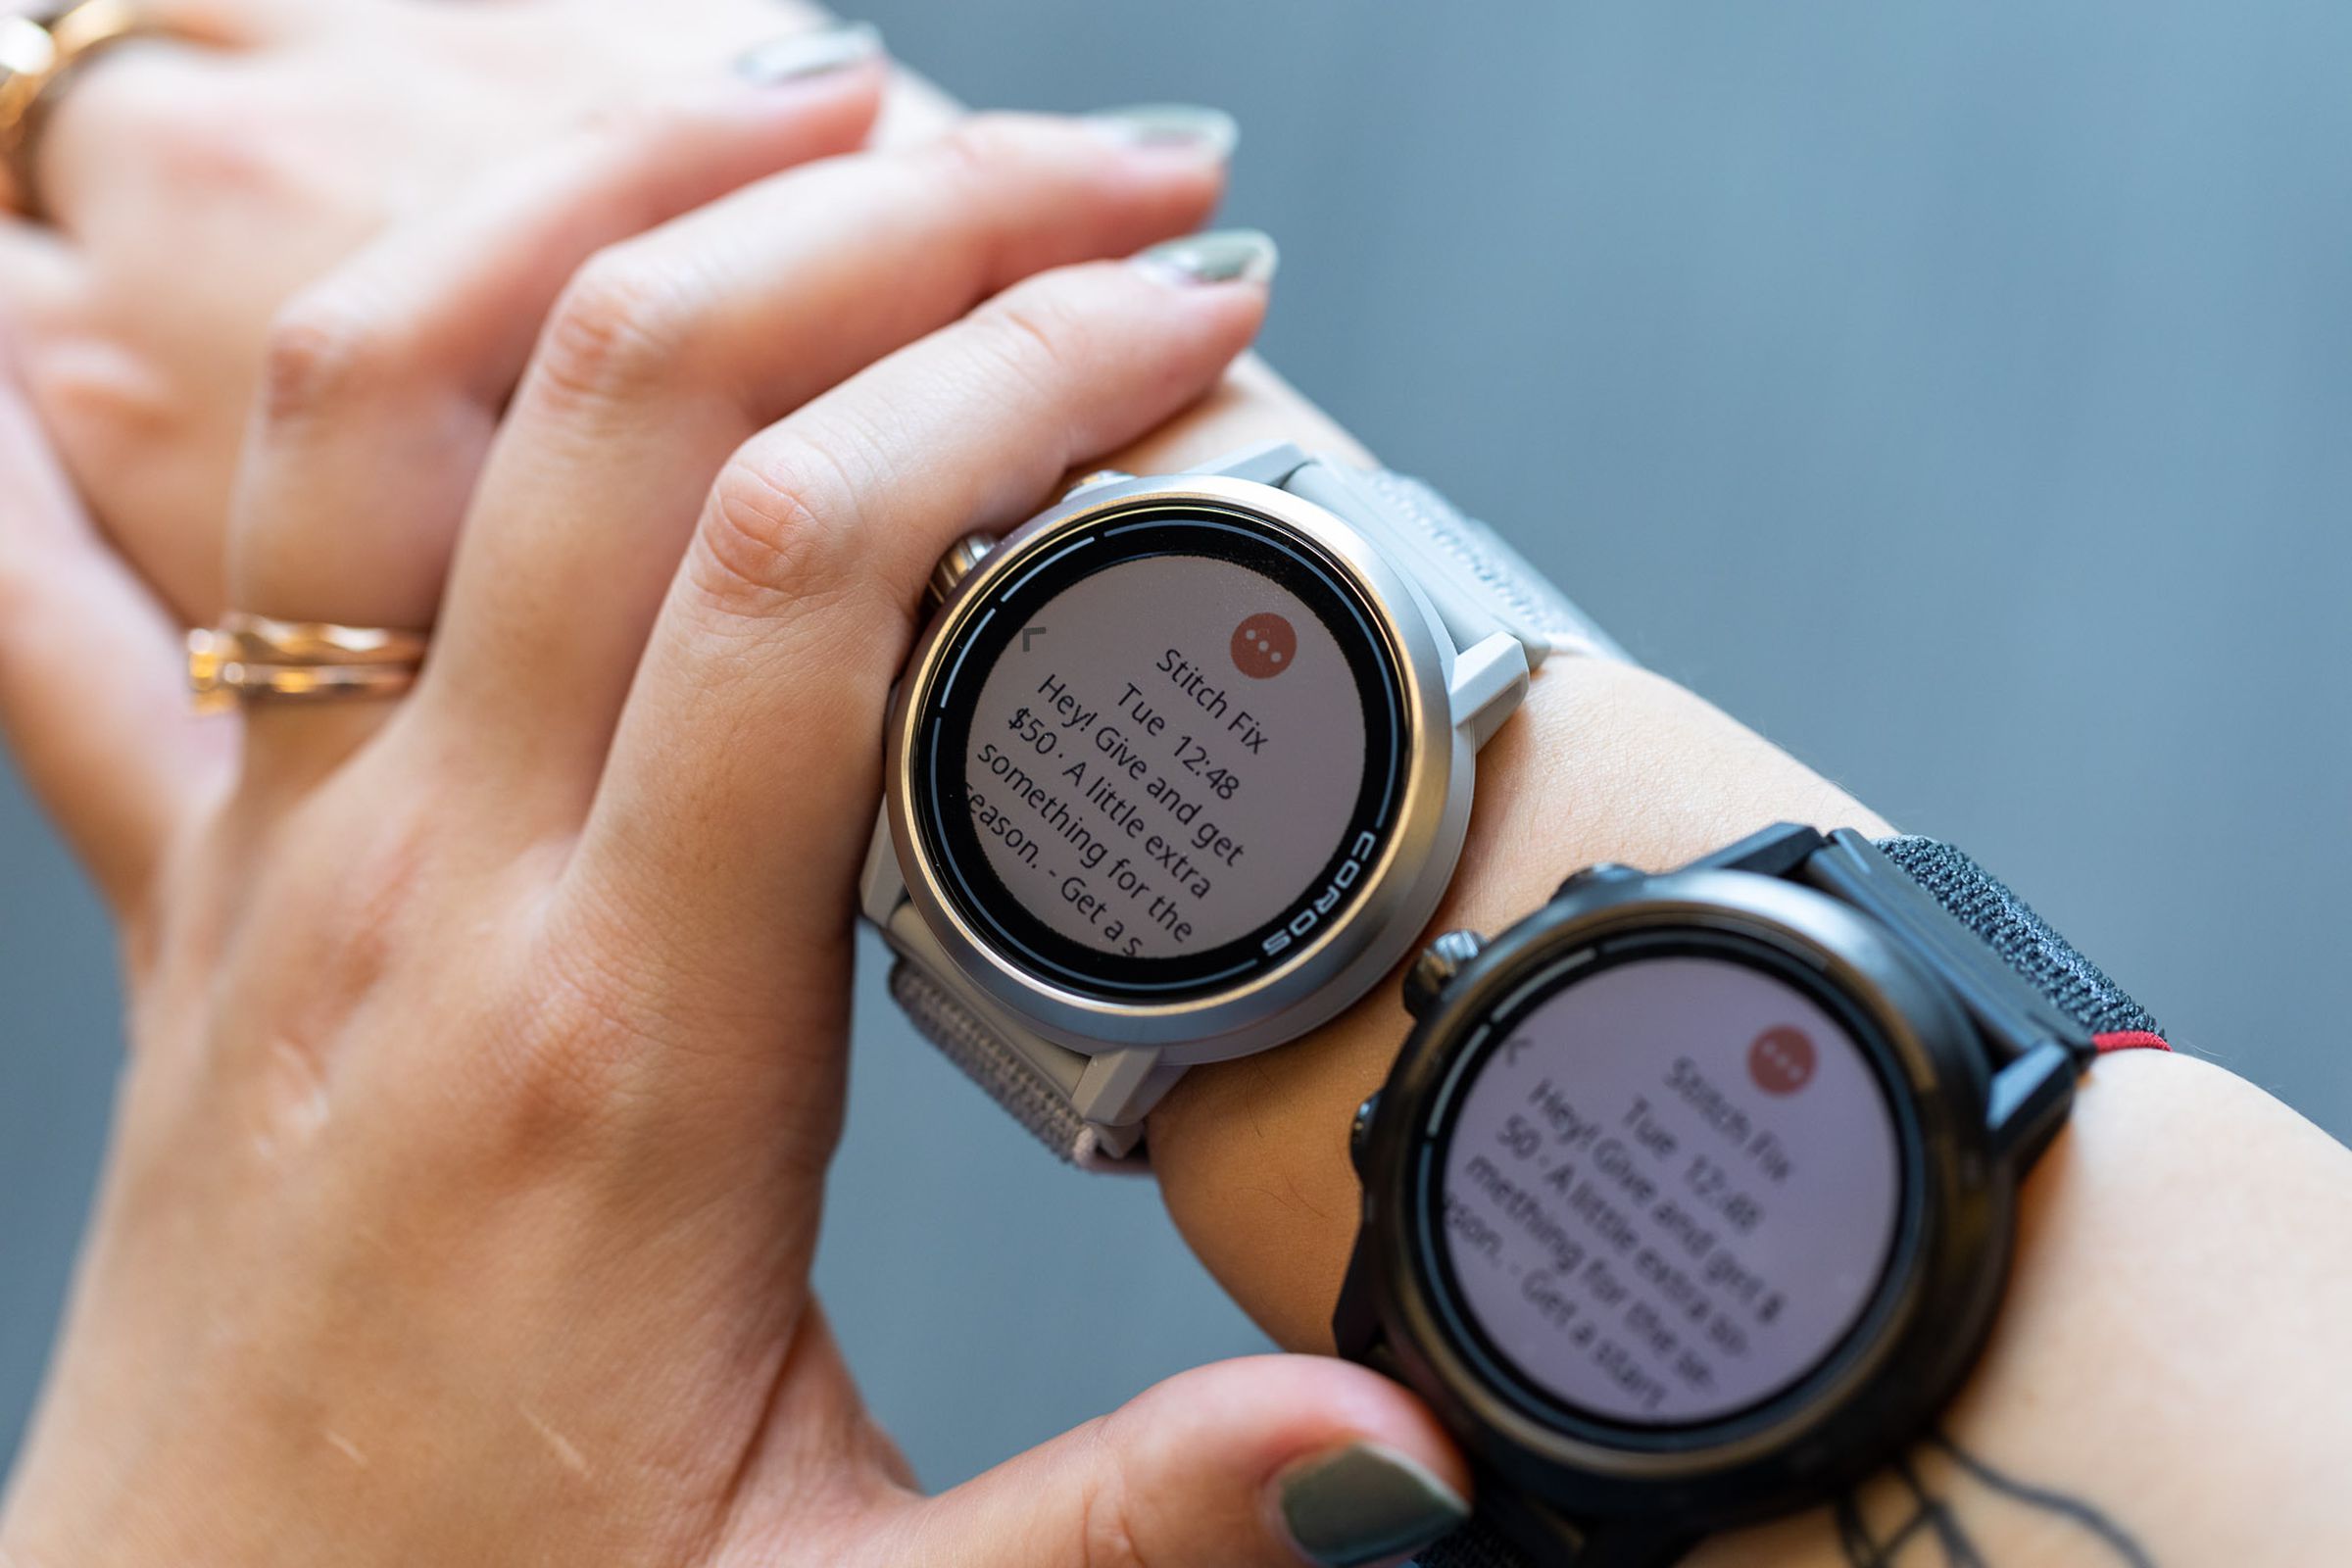 The Apex 2 and Apex 2 Pro showing the same notification while worn on the same wrist.